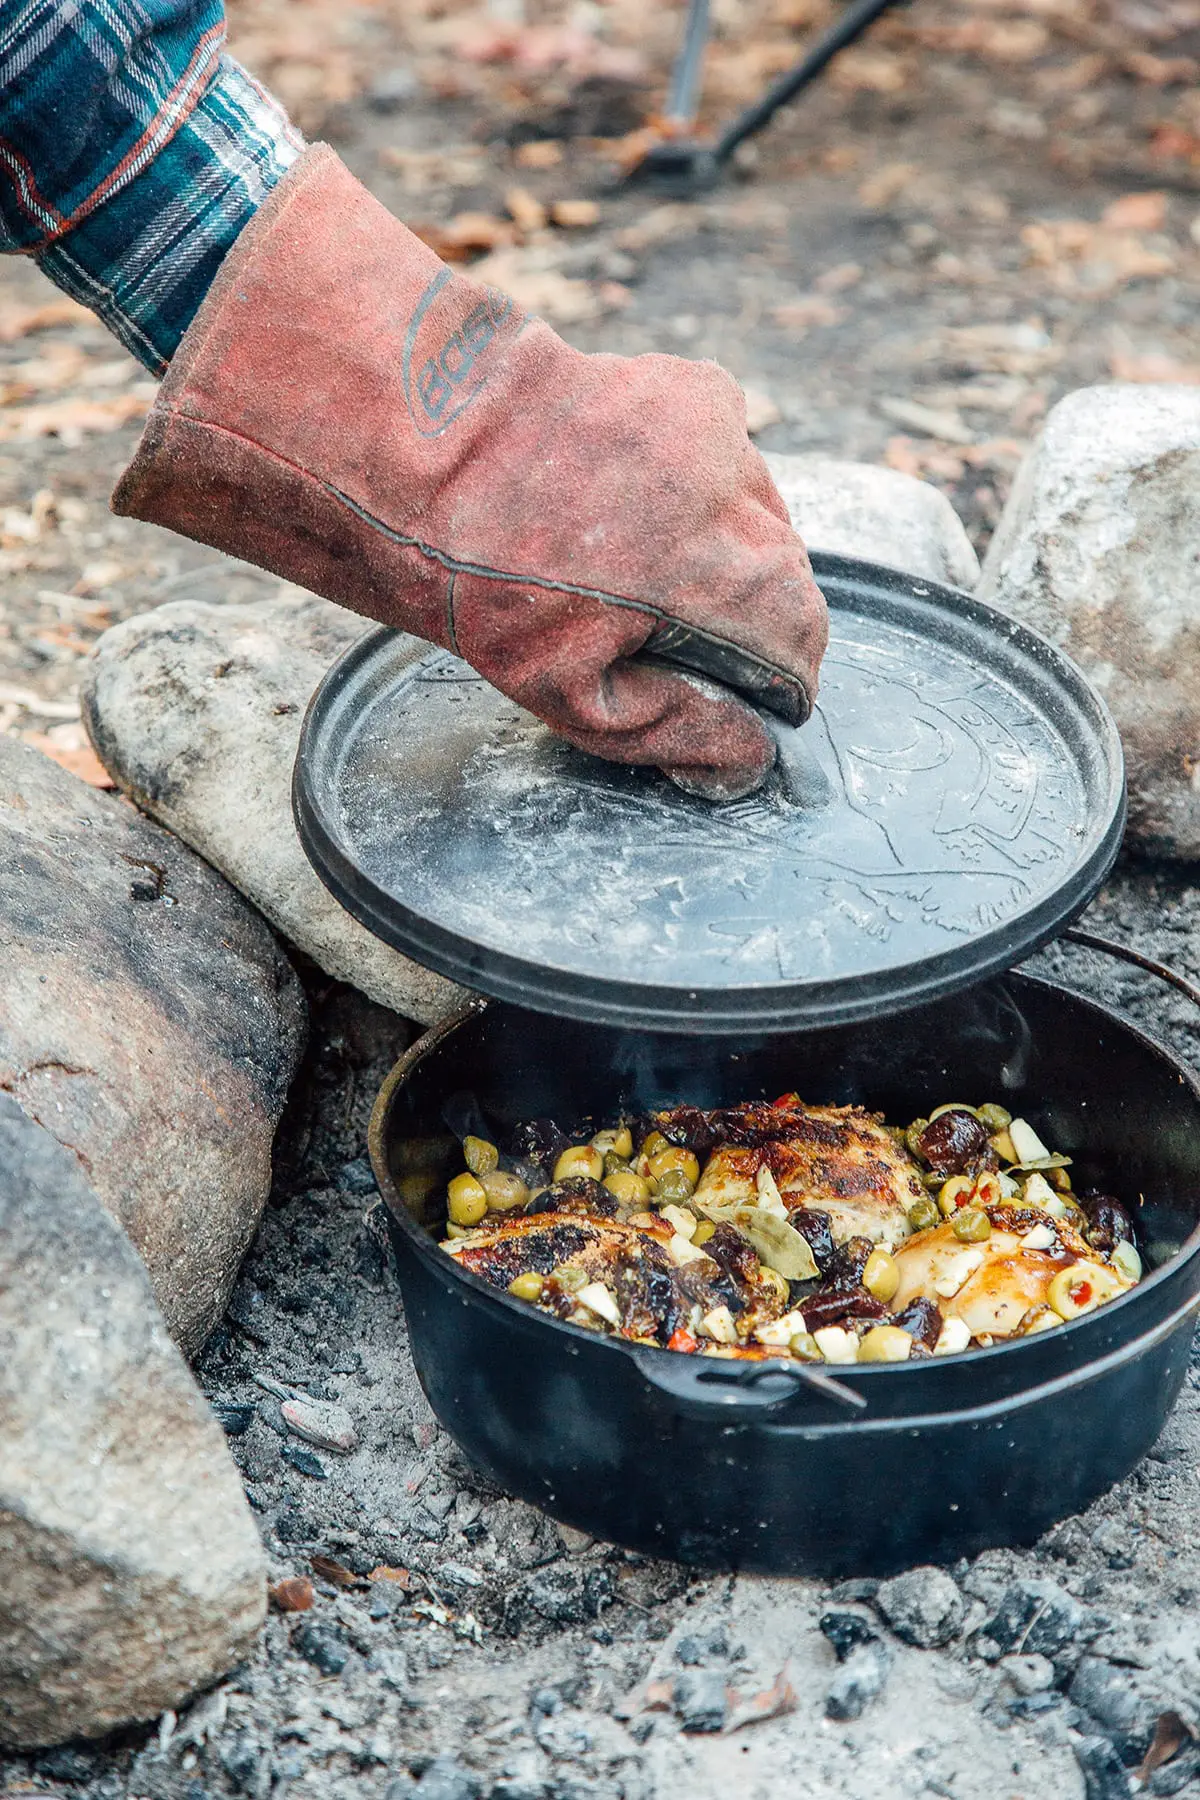 Dutch-Oven Cooking for Beginners: 3 Dutch Oven Recipes to Try